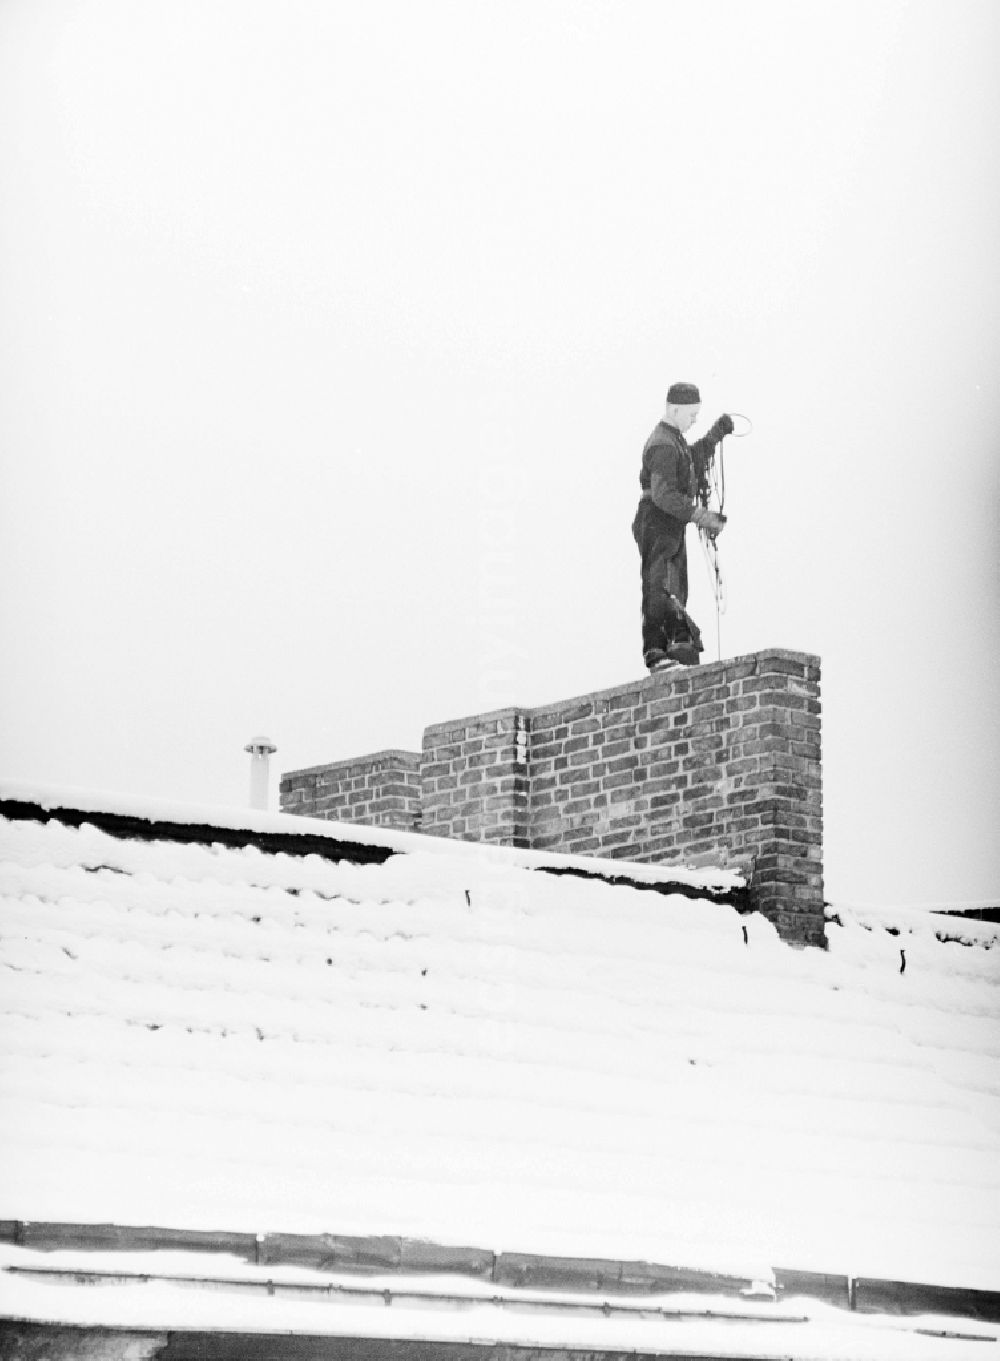 Berlin: A chimney sweep on snow-covered roofs round the chimneys in Berlin, the former capital of the GDR, German Democratic Republic